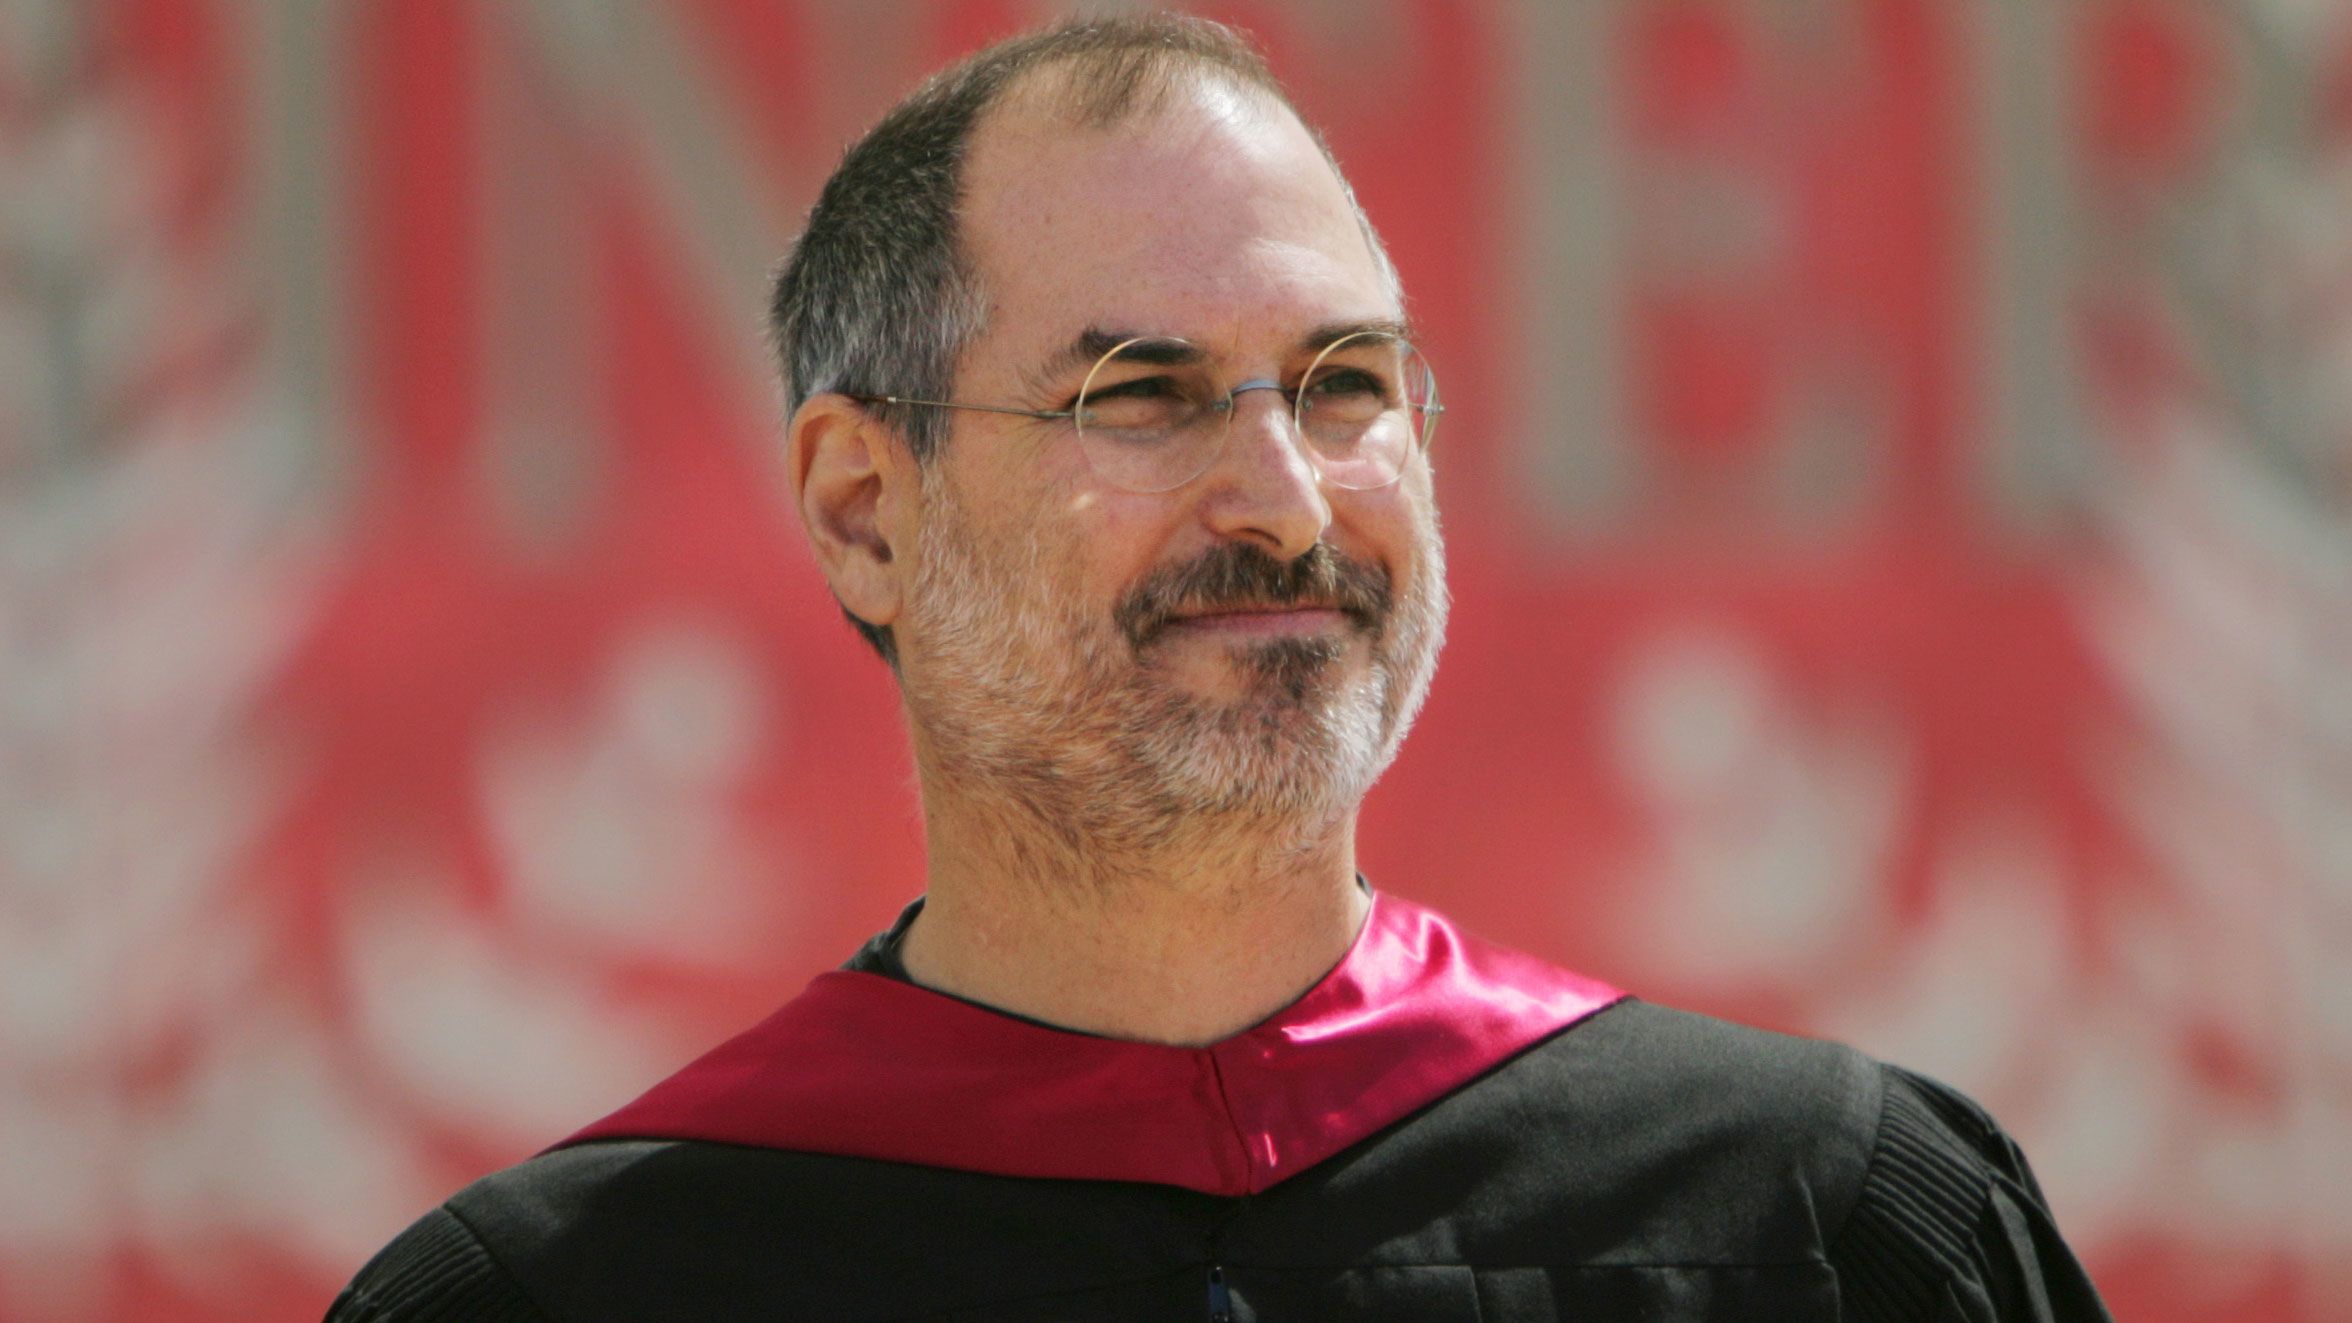 Why Steve Jobs' 2005 commencement speech is the most watched in history |  CNN